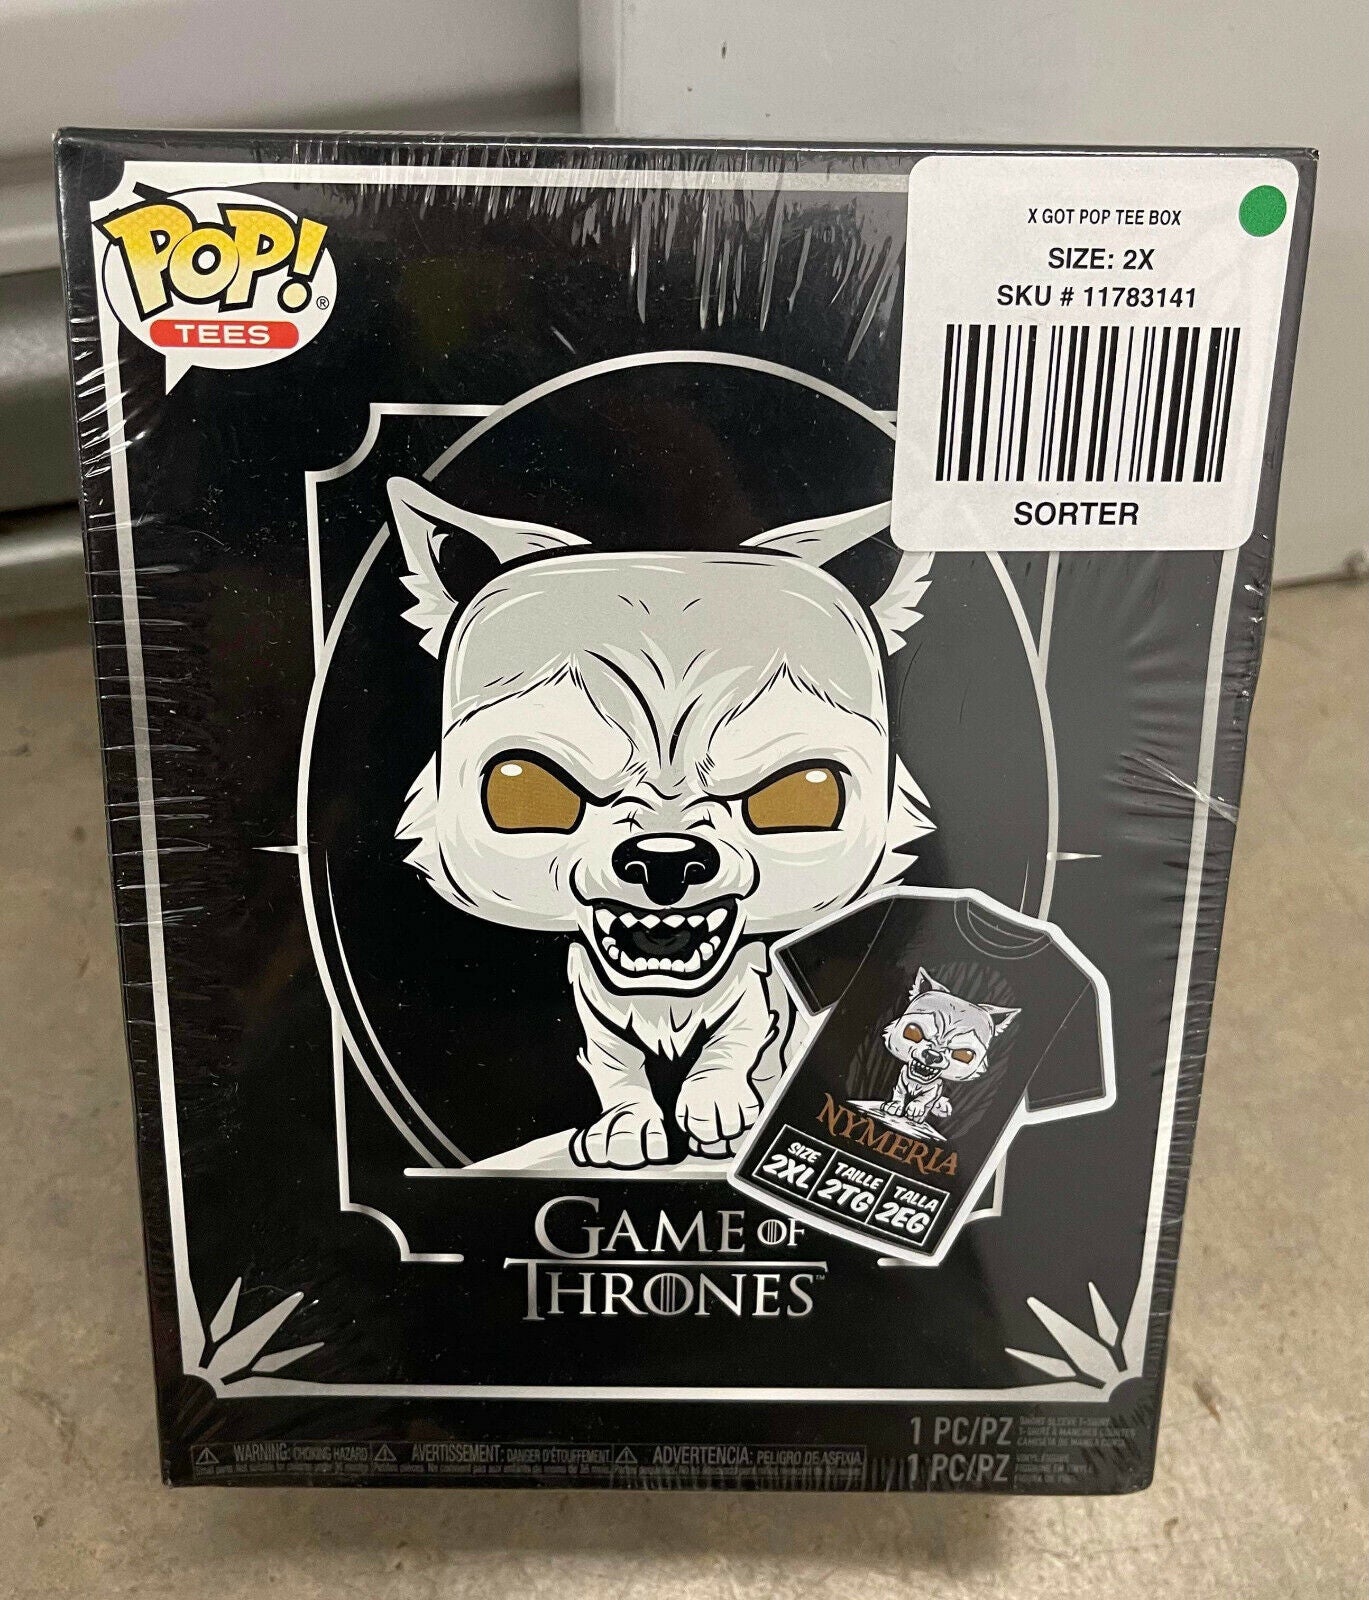 Game of Thrones Nymeria Funko Pop and Tee Bundle; Size 2 XL; New in Box; Sealed